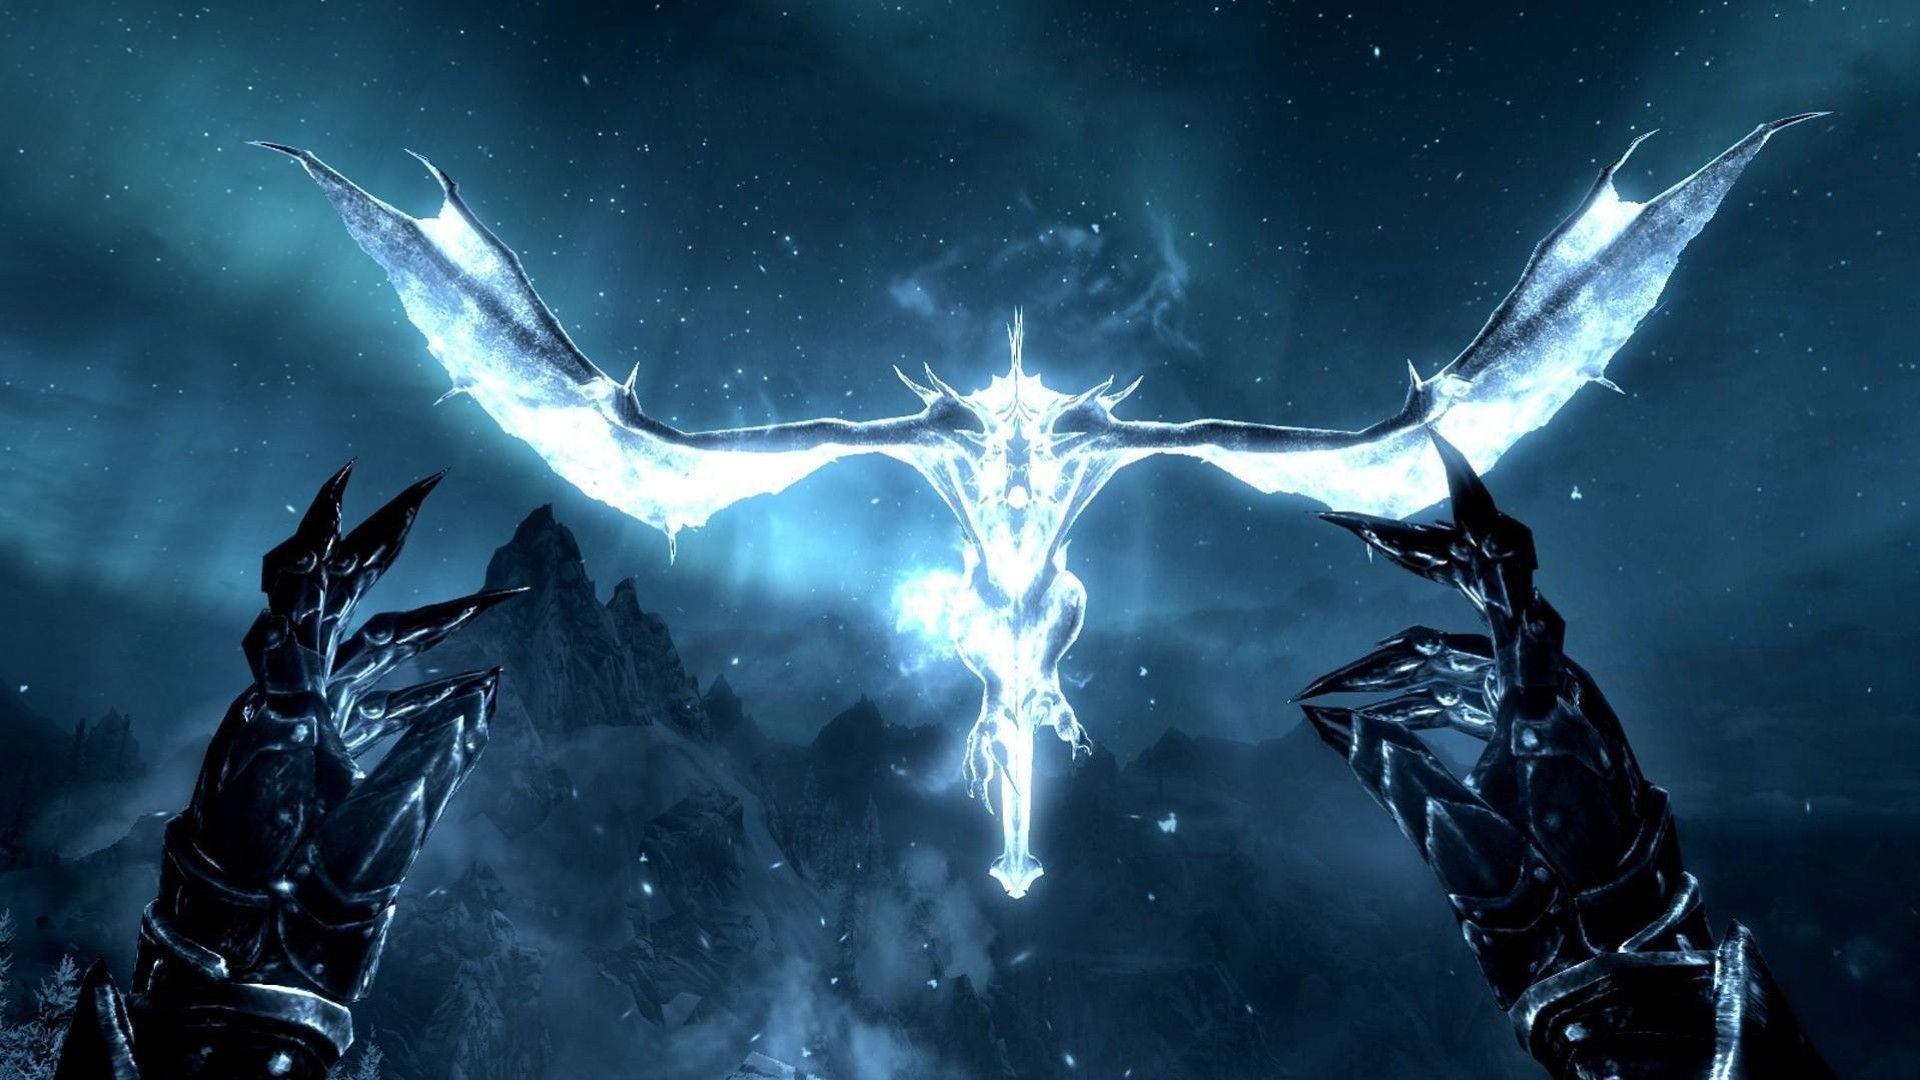 skyrim epic pictures, cool skyrim wallpapers